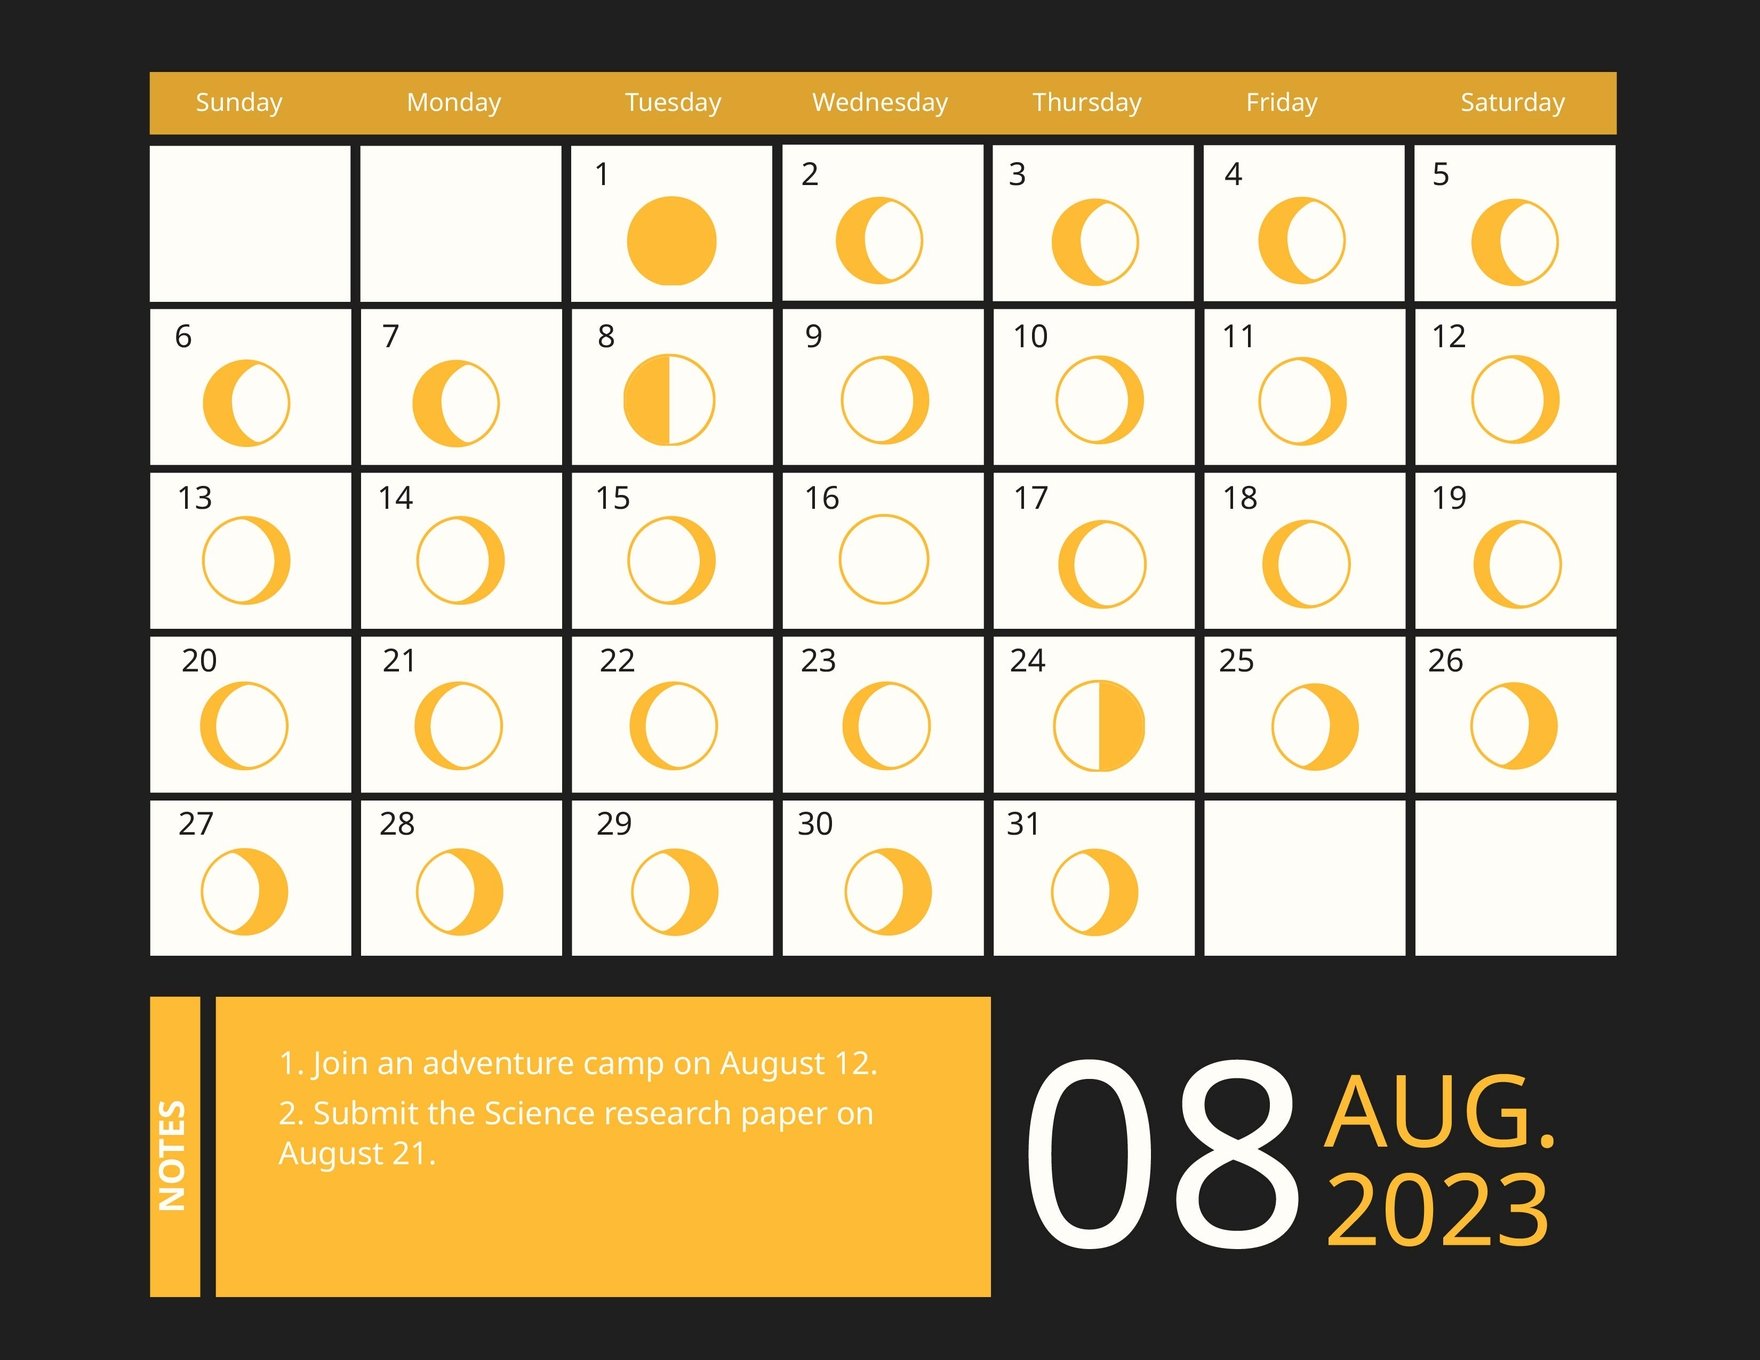 Free August 2023 Calendar Template With Moon Phases in Word, Google Docs, Excel, Google Sheets, Illustrator, EPS, SVG, JPG